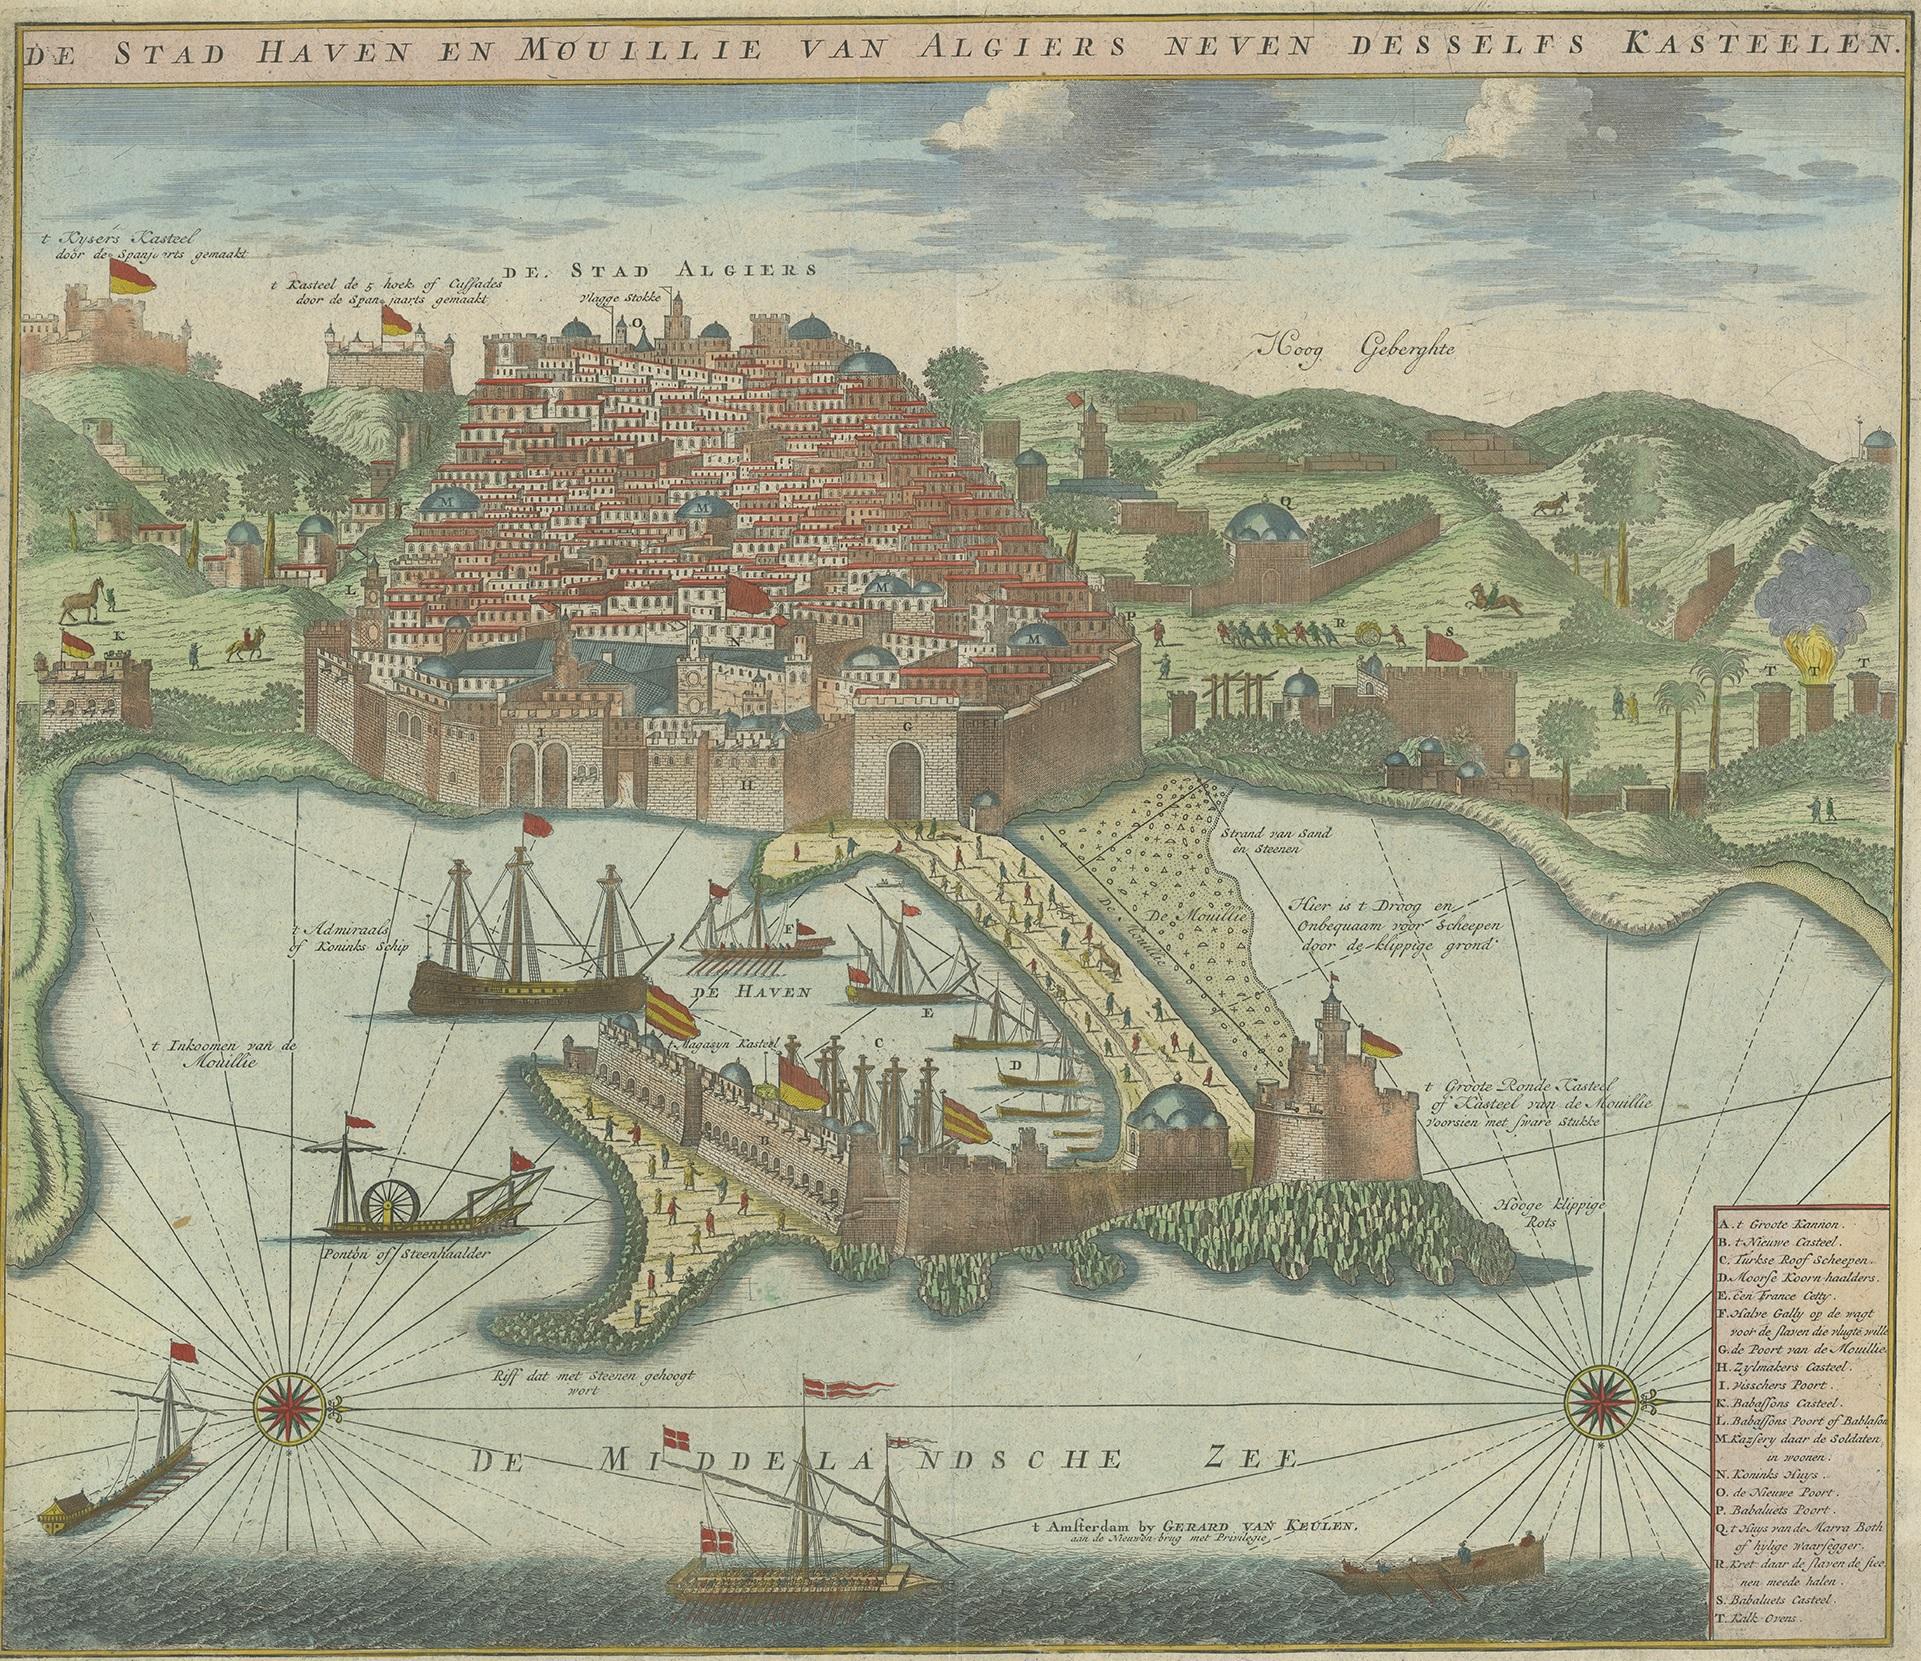 Antique print titled 'De Stad Haven en Mouillie van Algiers neven desselfs Kastelen'. Rare double-page bird's-eye view of the port and city of Algiers. With detailed key in the lower right corner. Published by G. van Keulen, circa 1720.